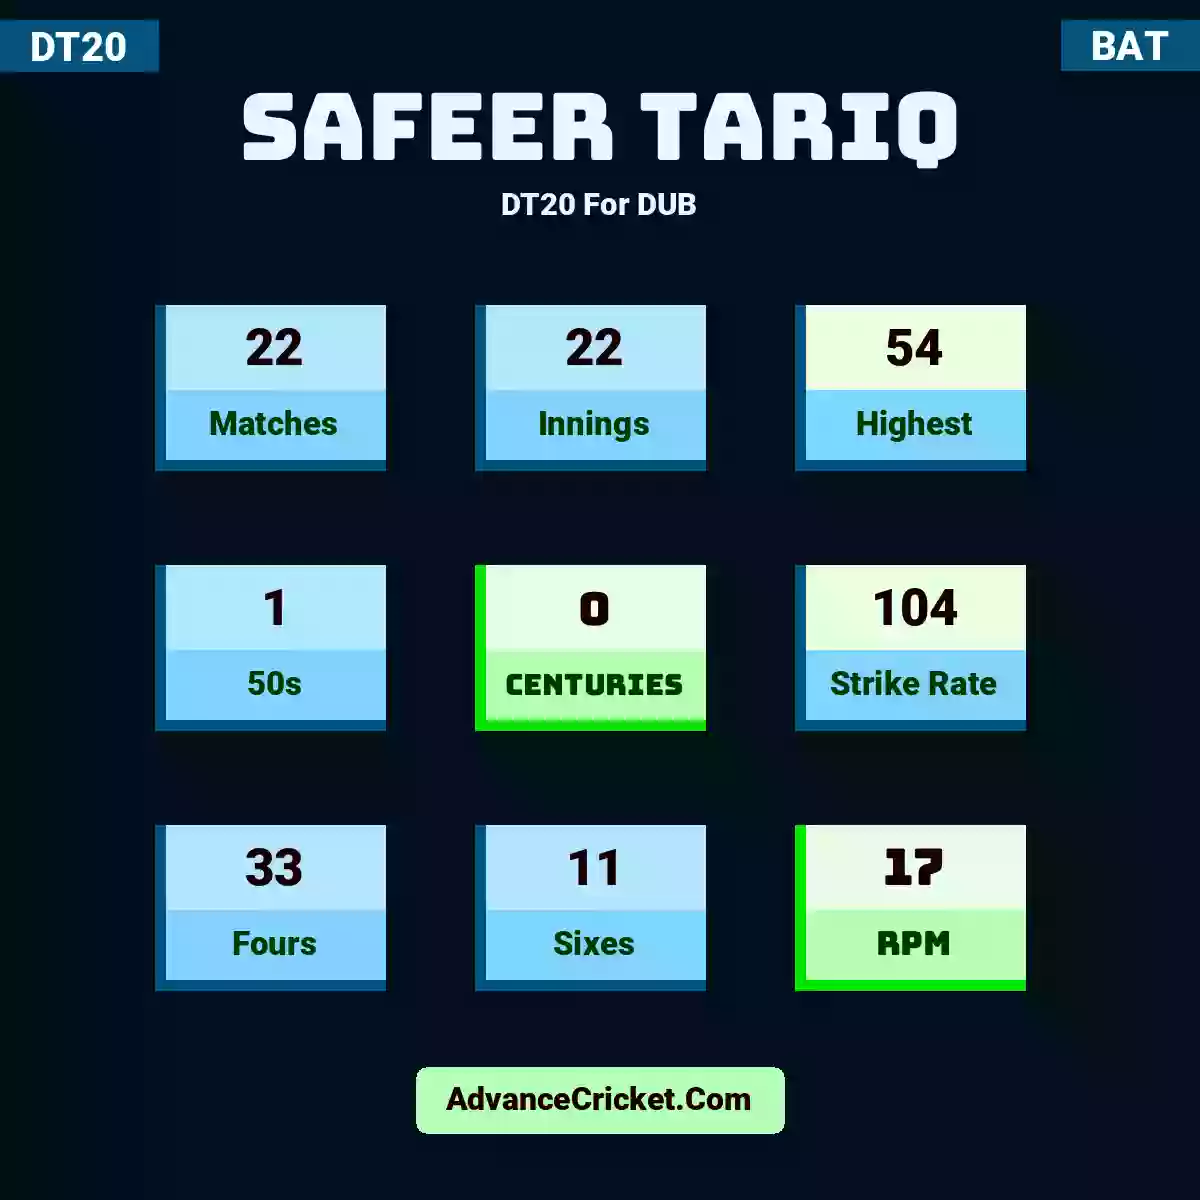 Safeer Tariq DT20  For DUB, Safeer Tariq played 22 matches, scored 54 runs as highest, 1 half-centuries, and 0 centuries, with a strike rate of 104. S.Tariq hit 33 fours and 11 sixes, with an RPM of 17.